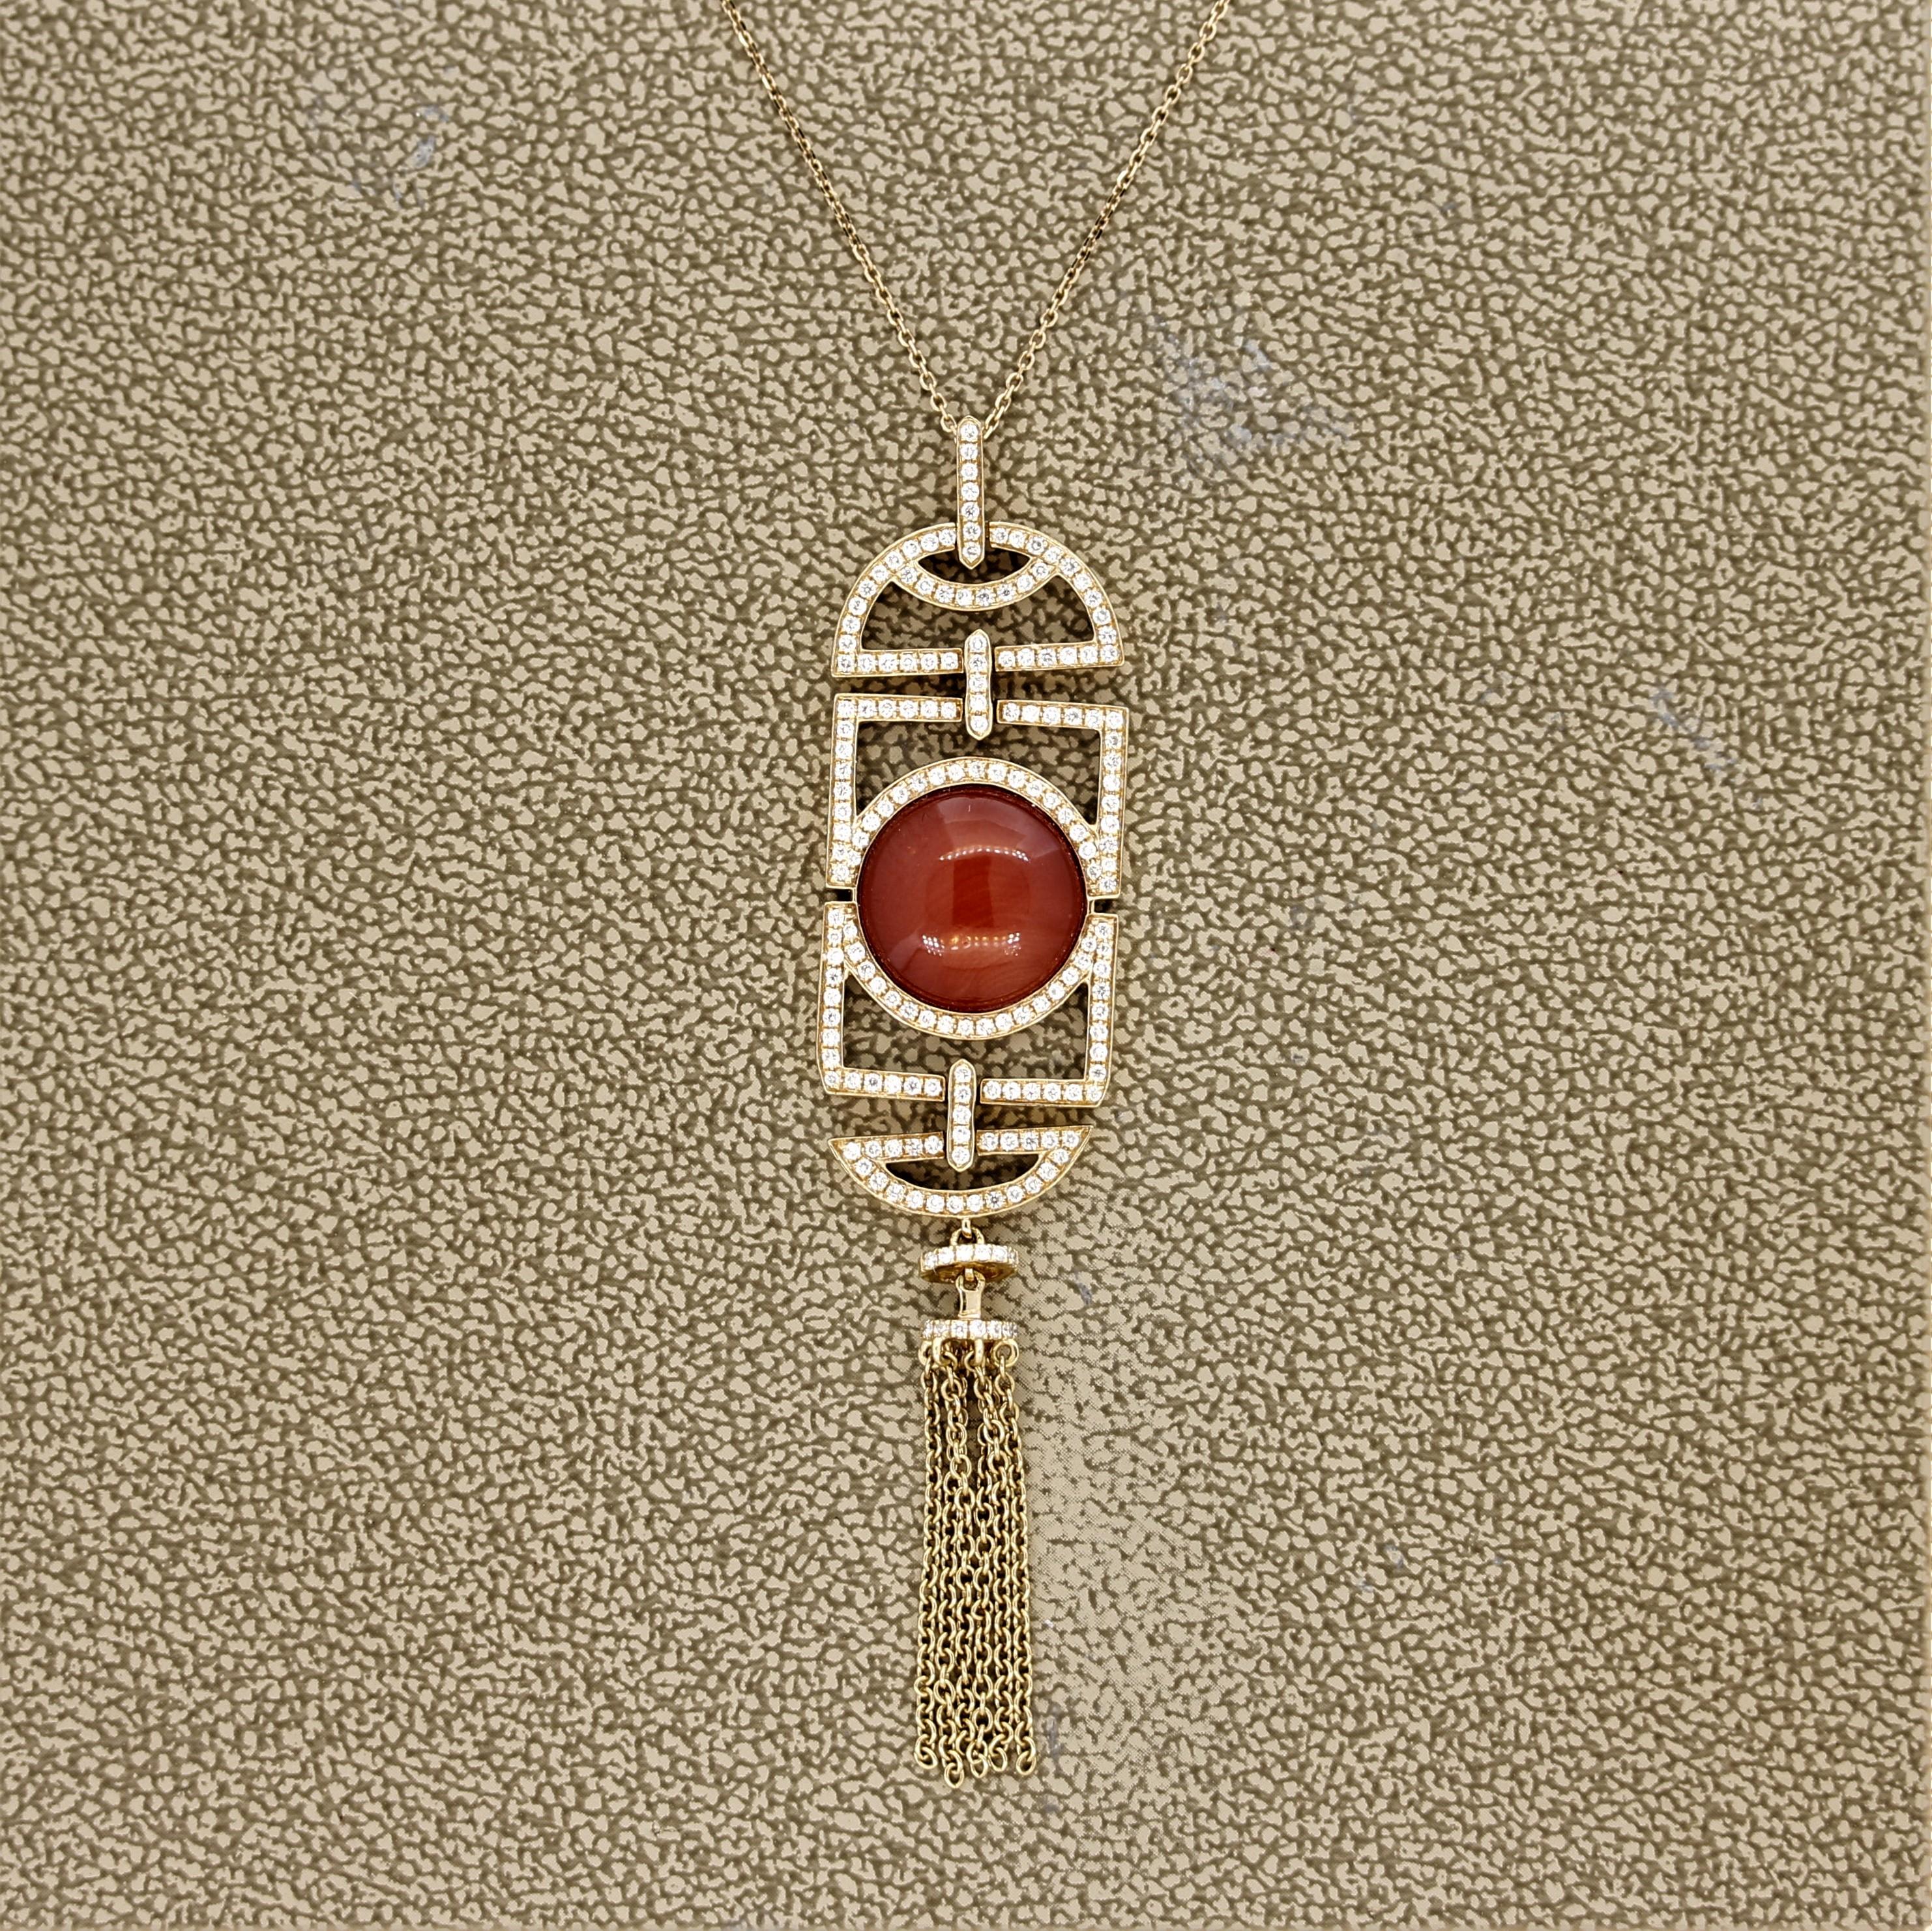 A stylish pendant featuring a 3.40 carat piece of natural red coral. It has a bright red color and a smooth polish making it appear as if the coral is glowing. It is accented by 0.54 carats of round brilliant cut diamonds set in a unique pattern.